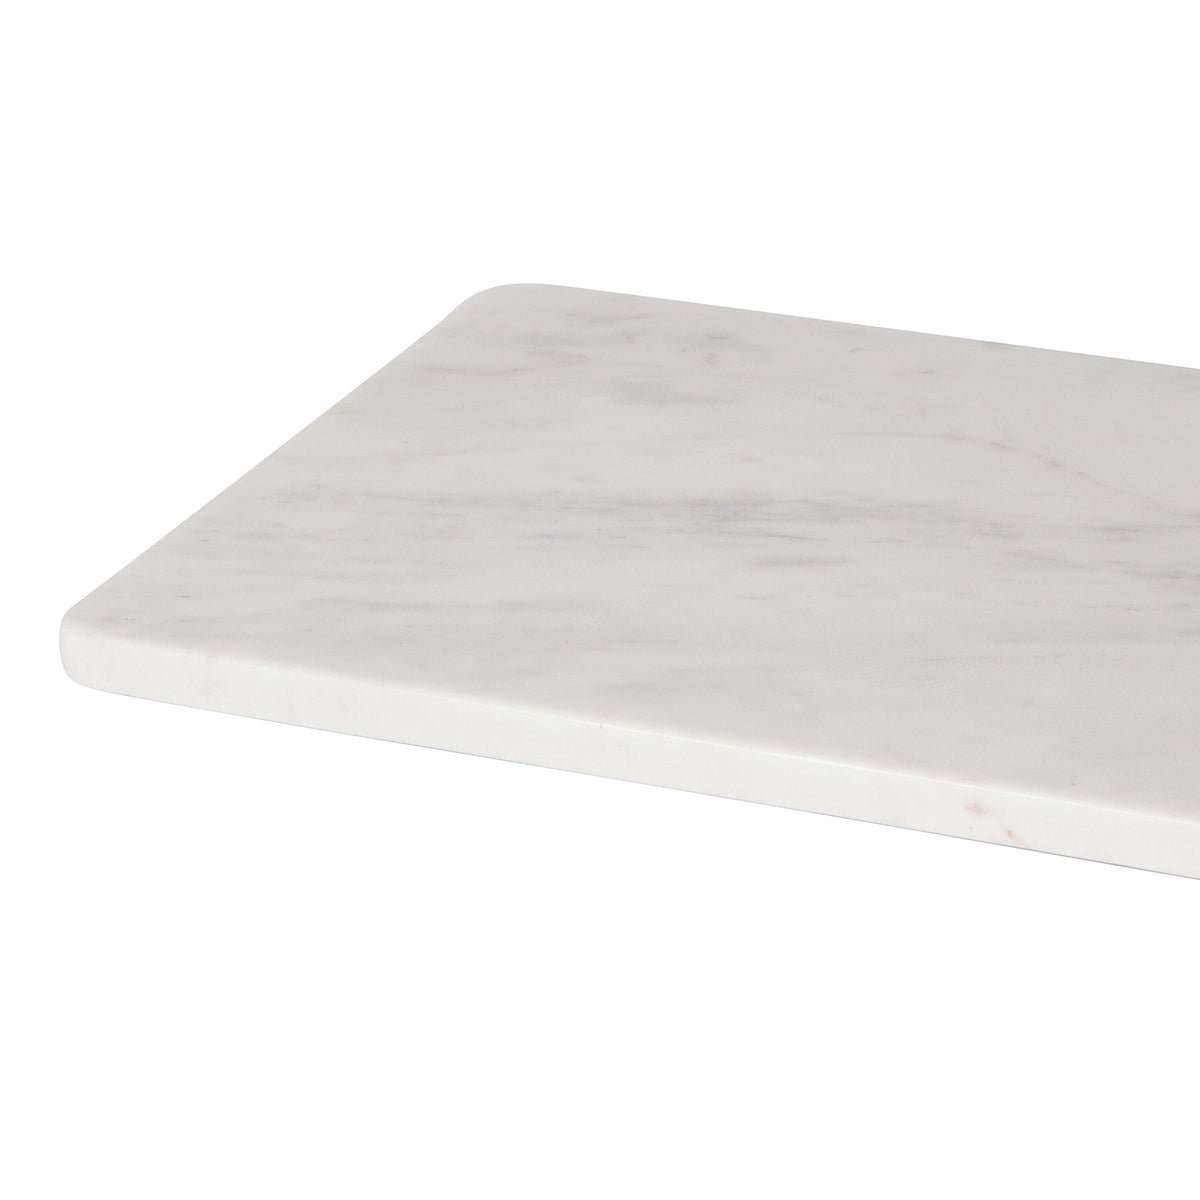 Marble Serving Board, White